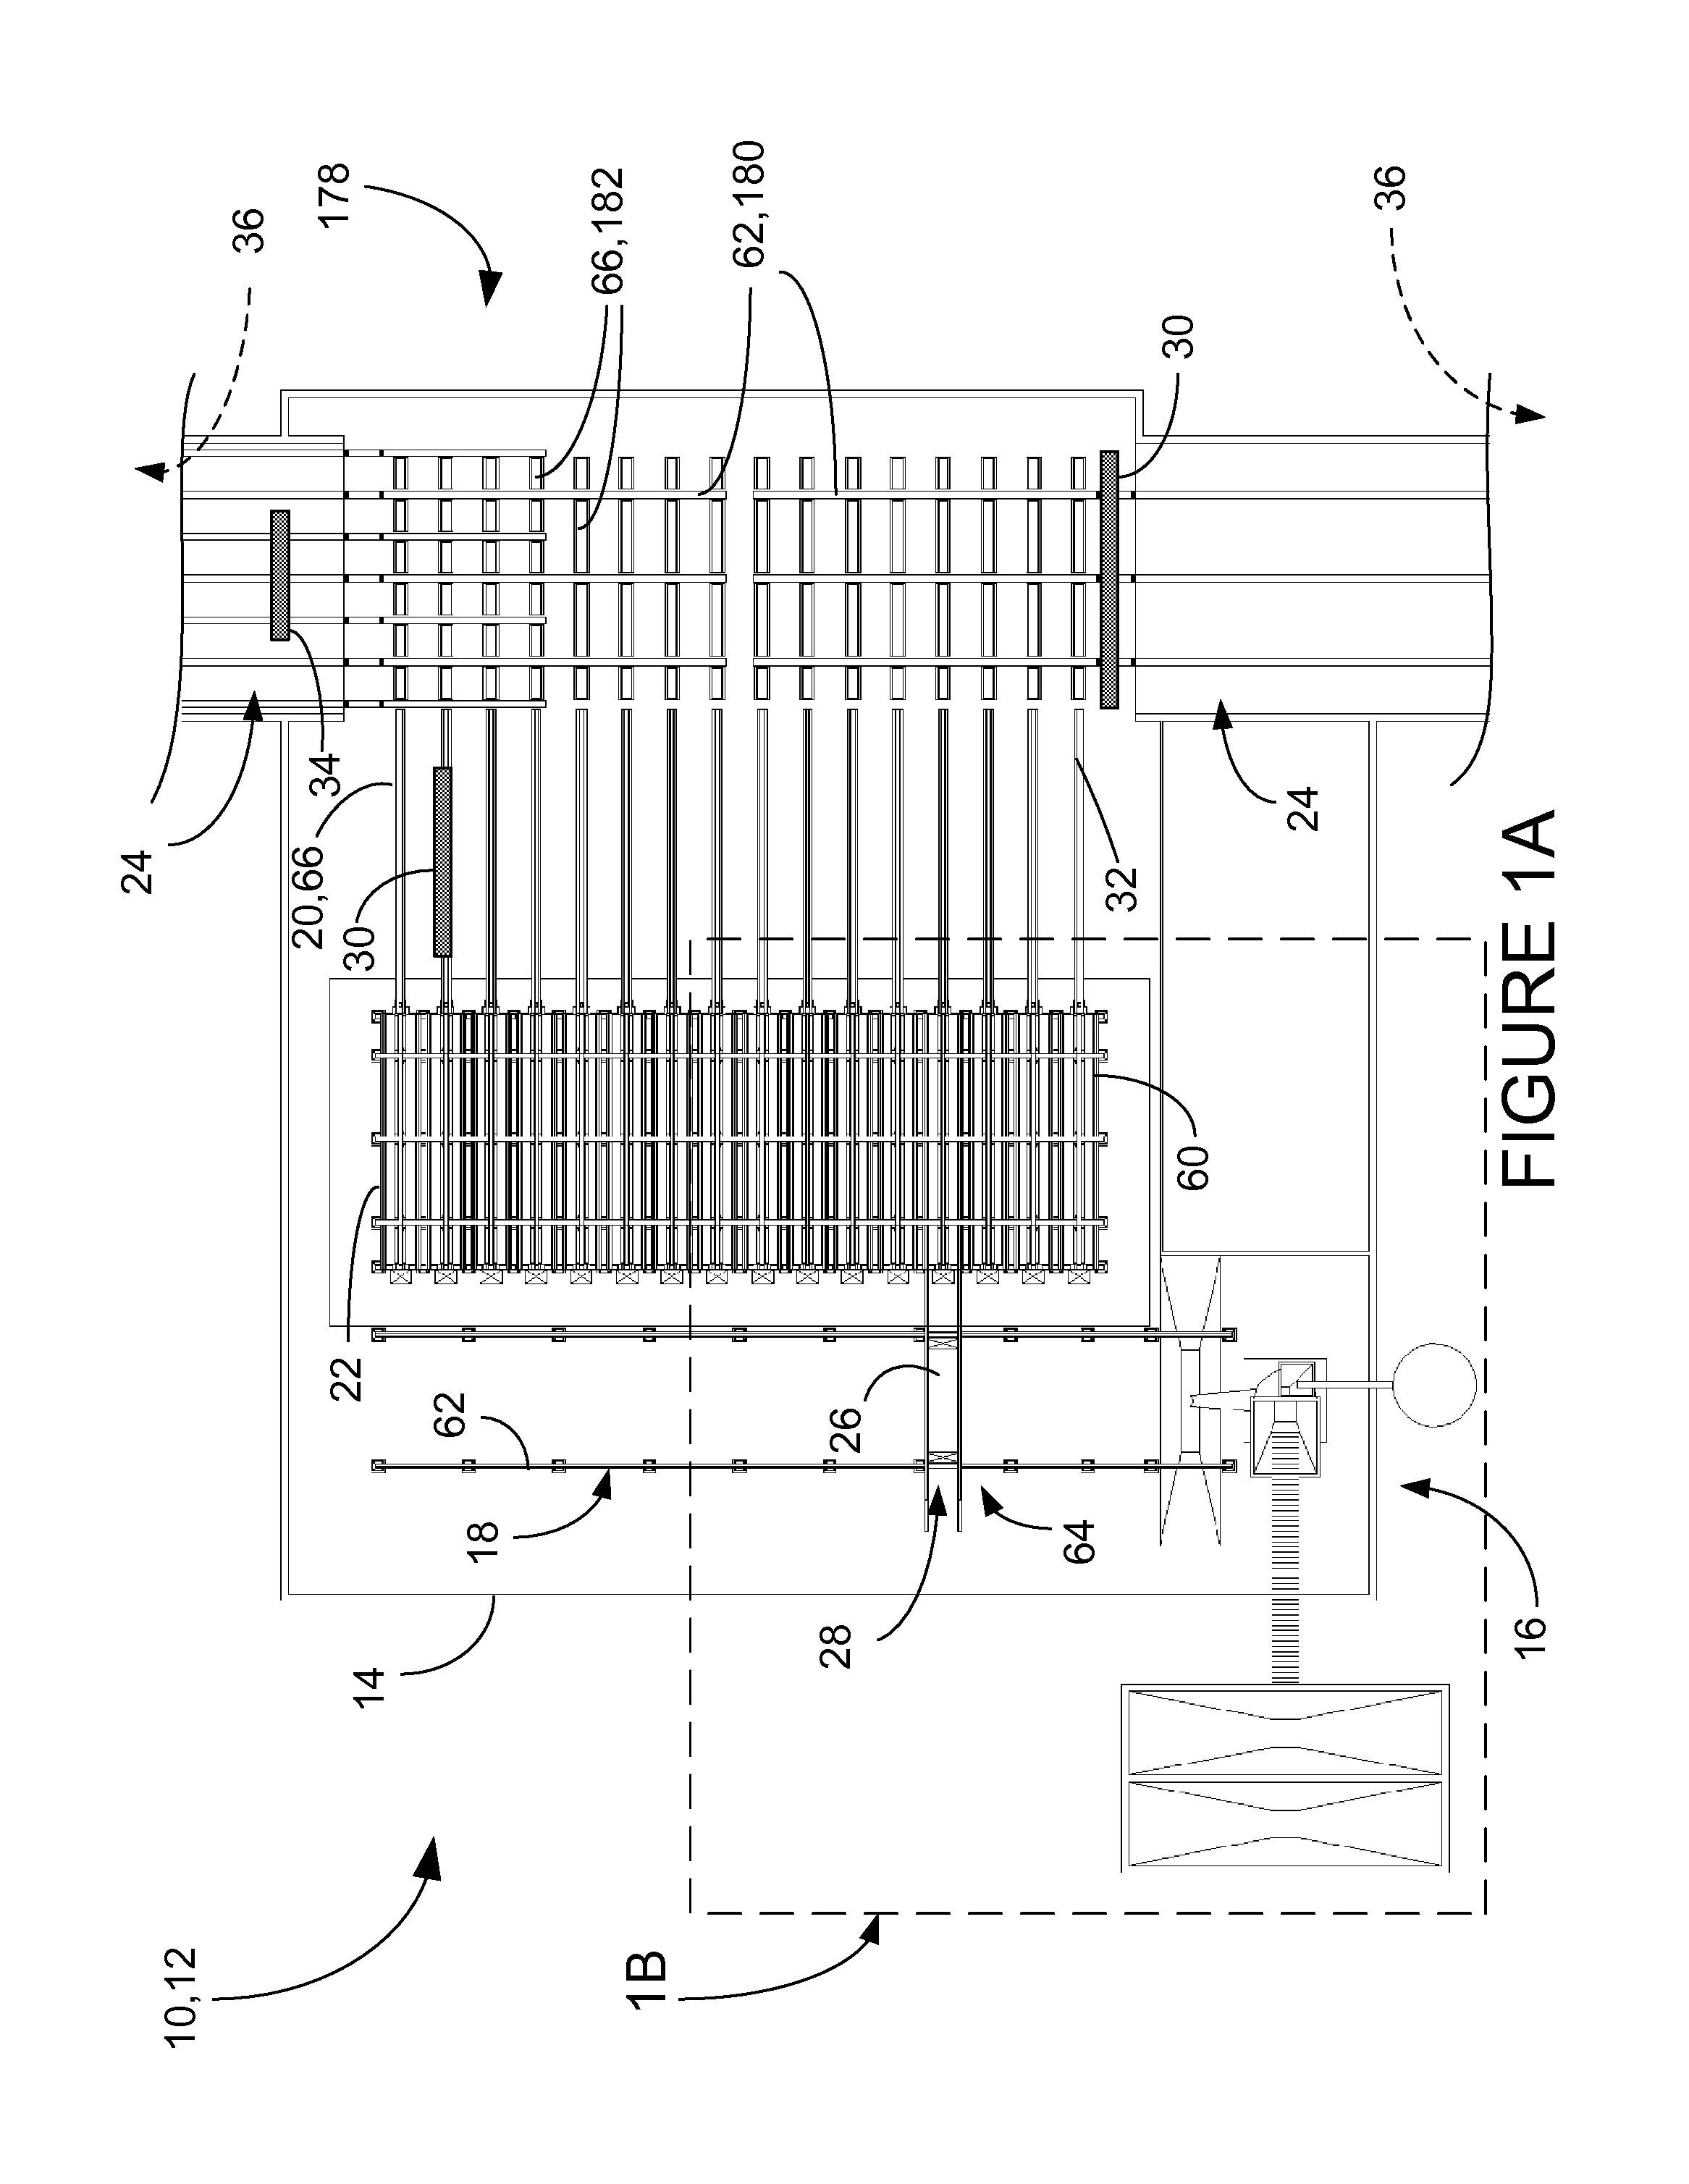 Automated concrete structural member fabrication system, apparatus and method